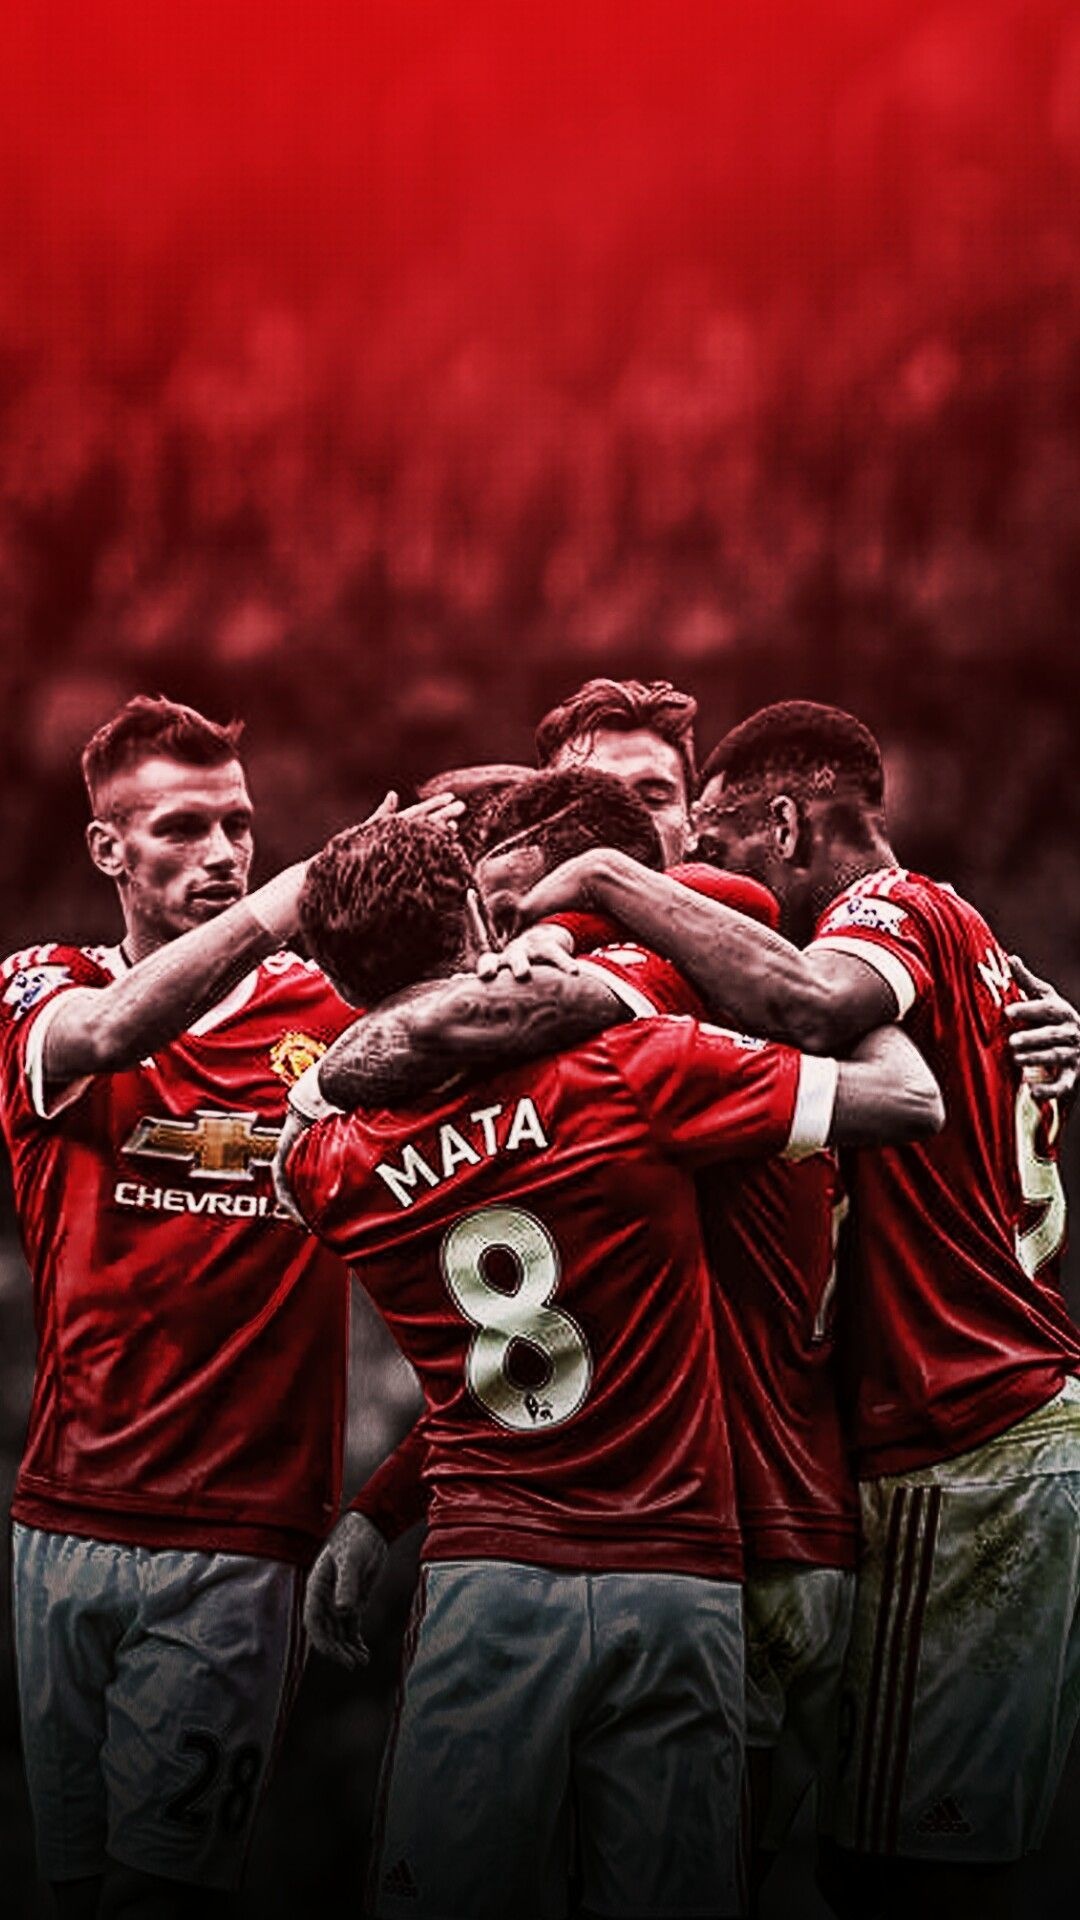 Manchester United, Football legends, Team tradition, Glory on field, 1080x1920 Full HD Handy